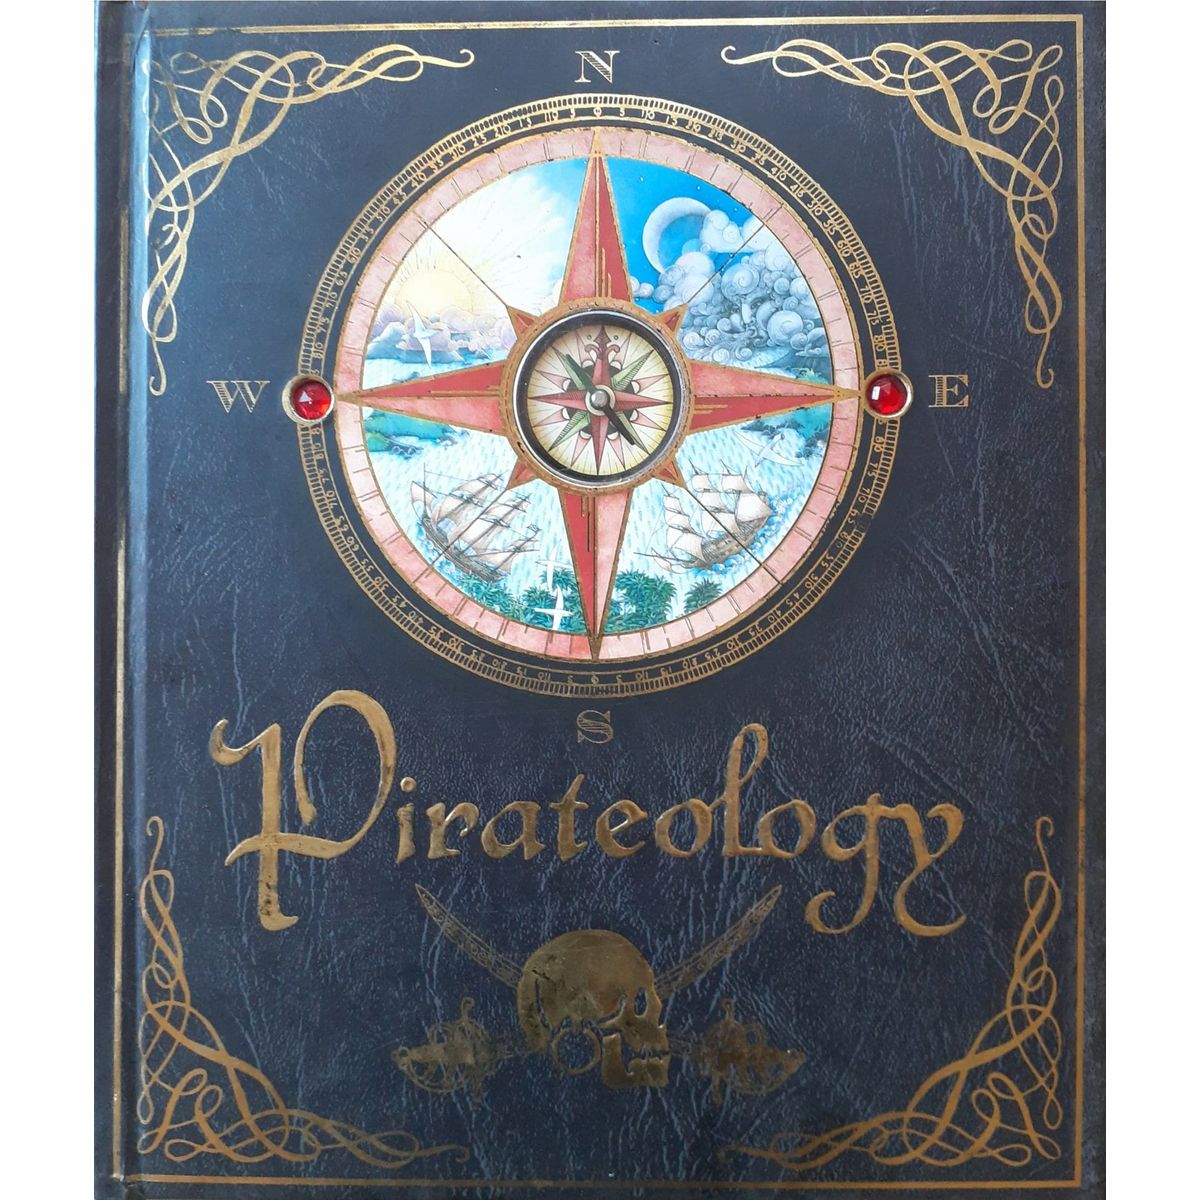 ISBN: 9781840112702 / 1840112700 - Pirateology by Dugald A. Steer [2006]